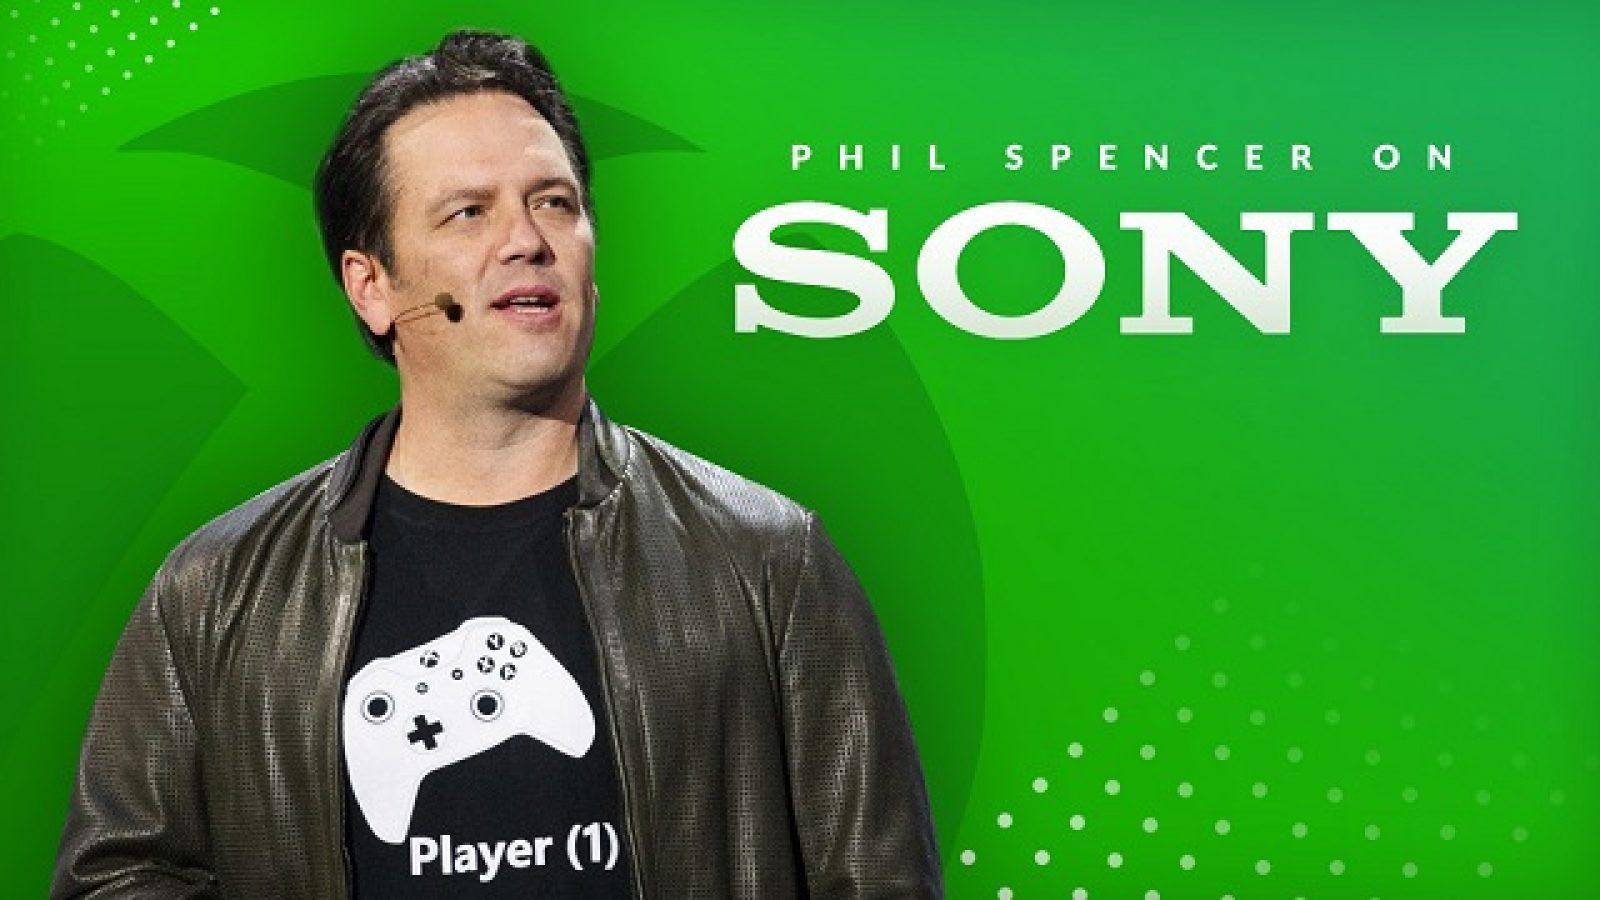 Xbox boss Phil Spencer says Starfield takes a few hours before it